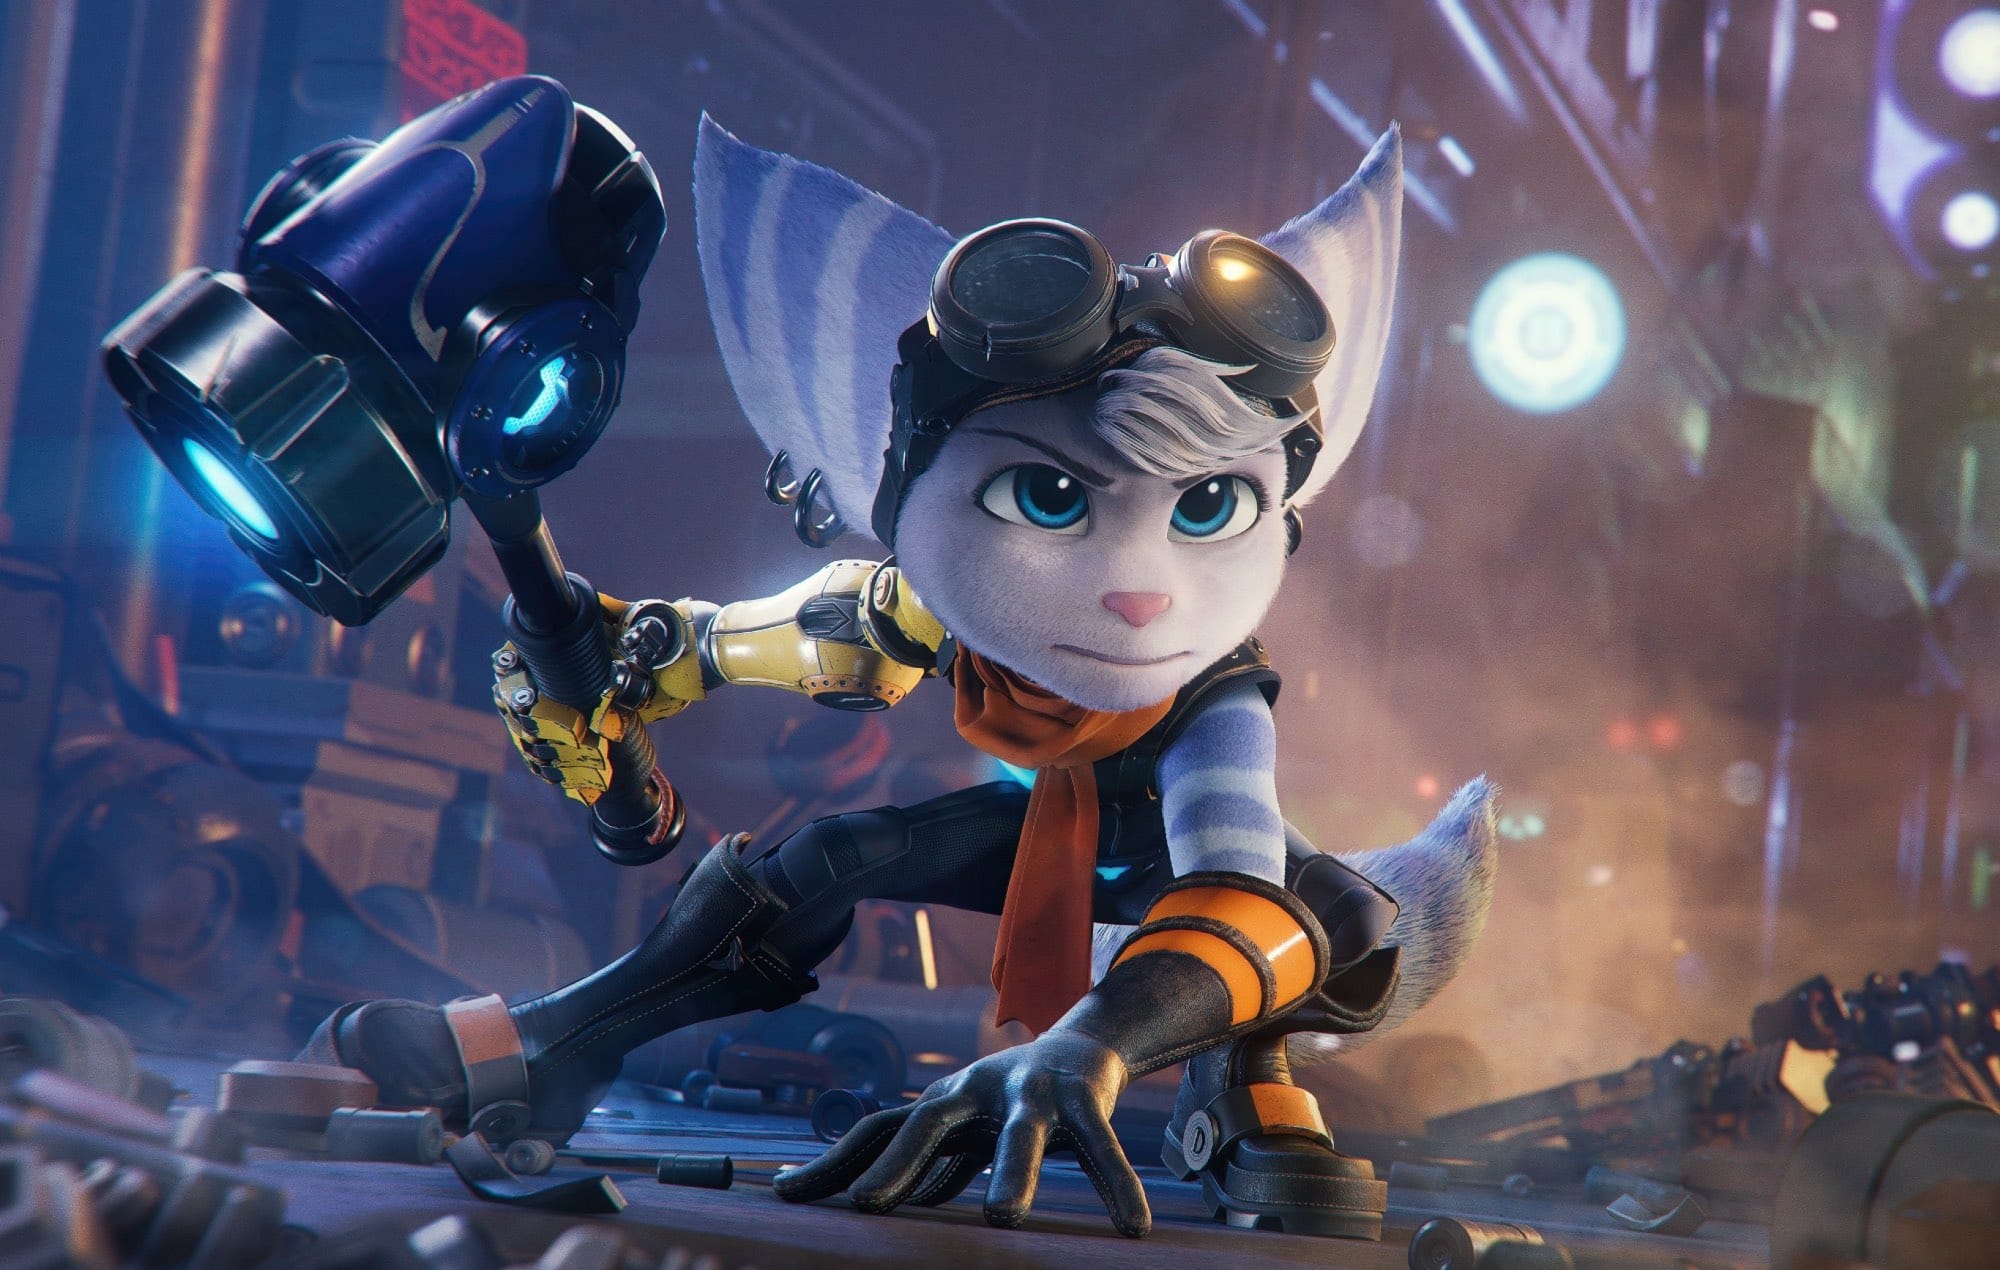 Will Ratchet & Clank: Rift Apart Release On PS4?